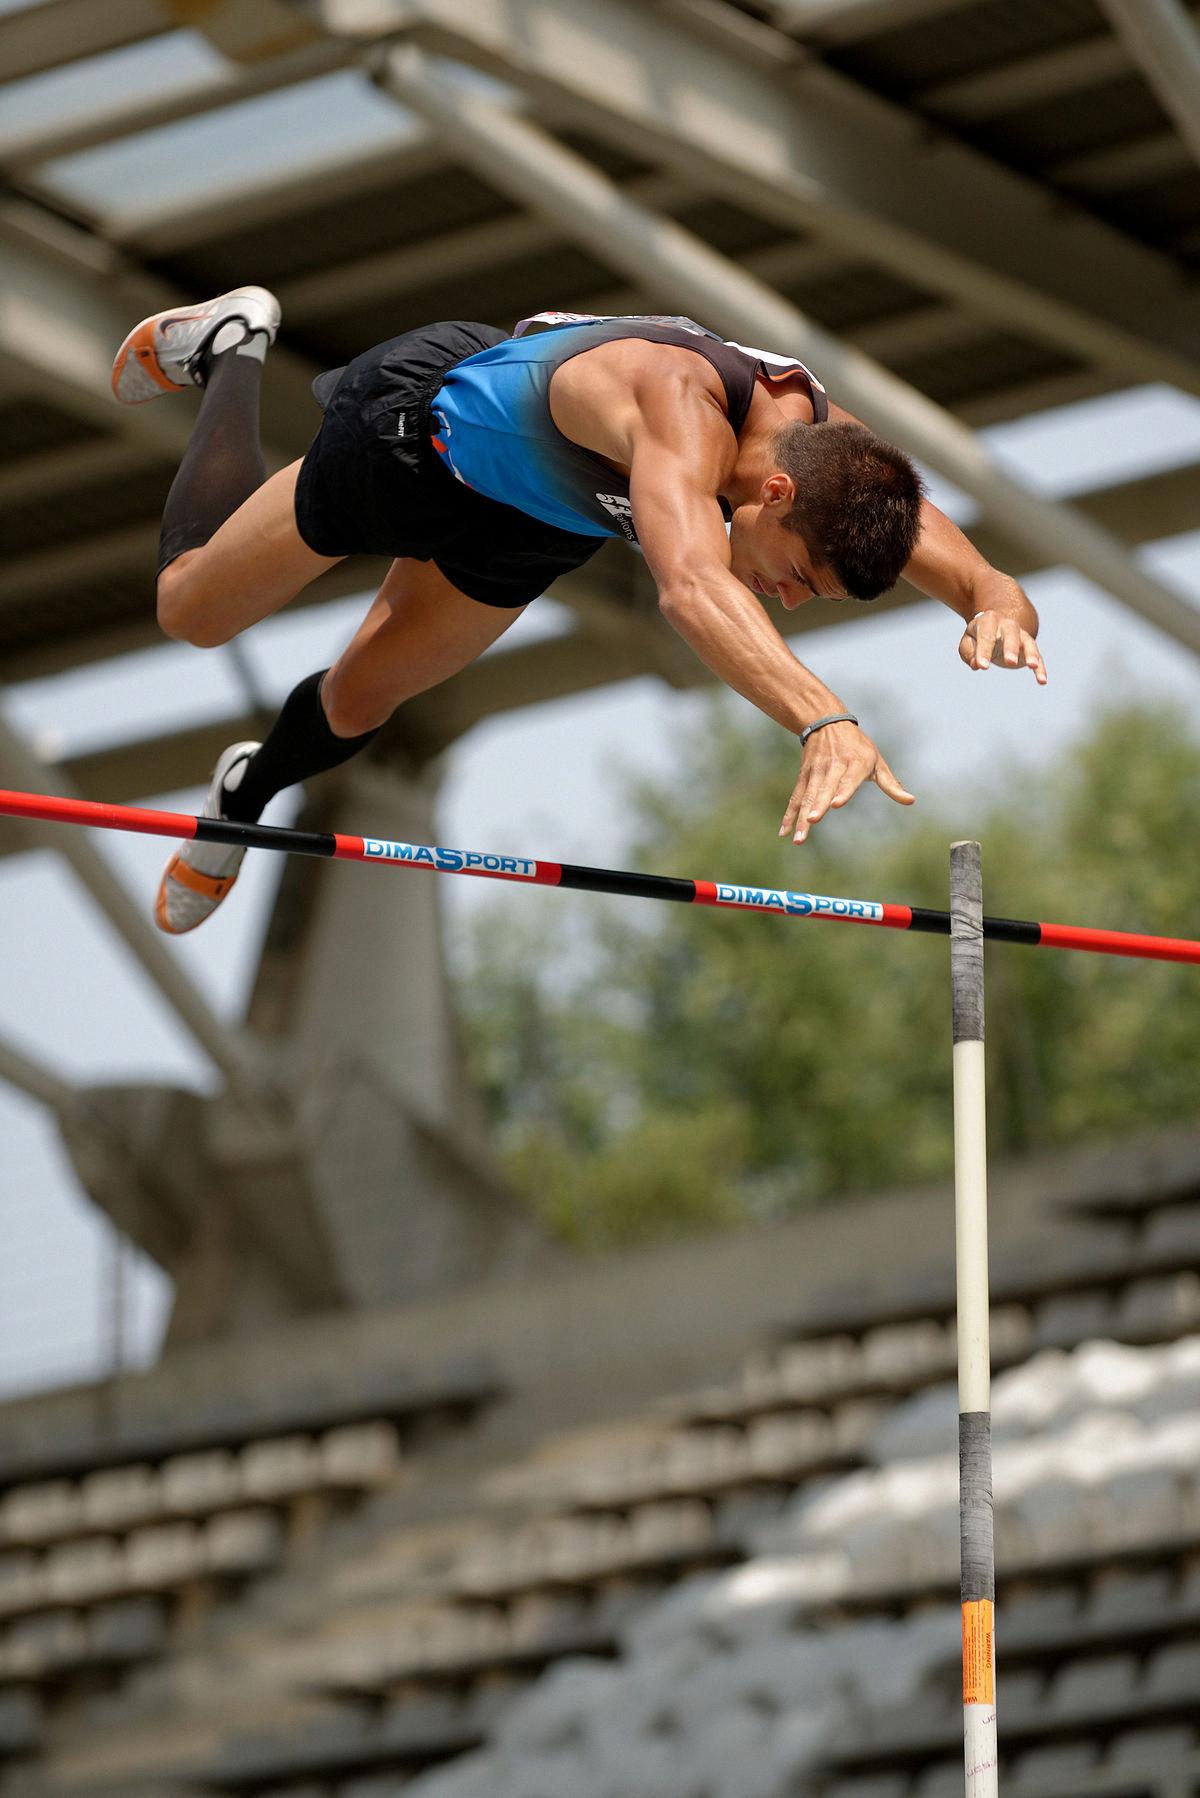 what events are in a decathlon